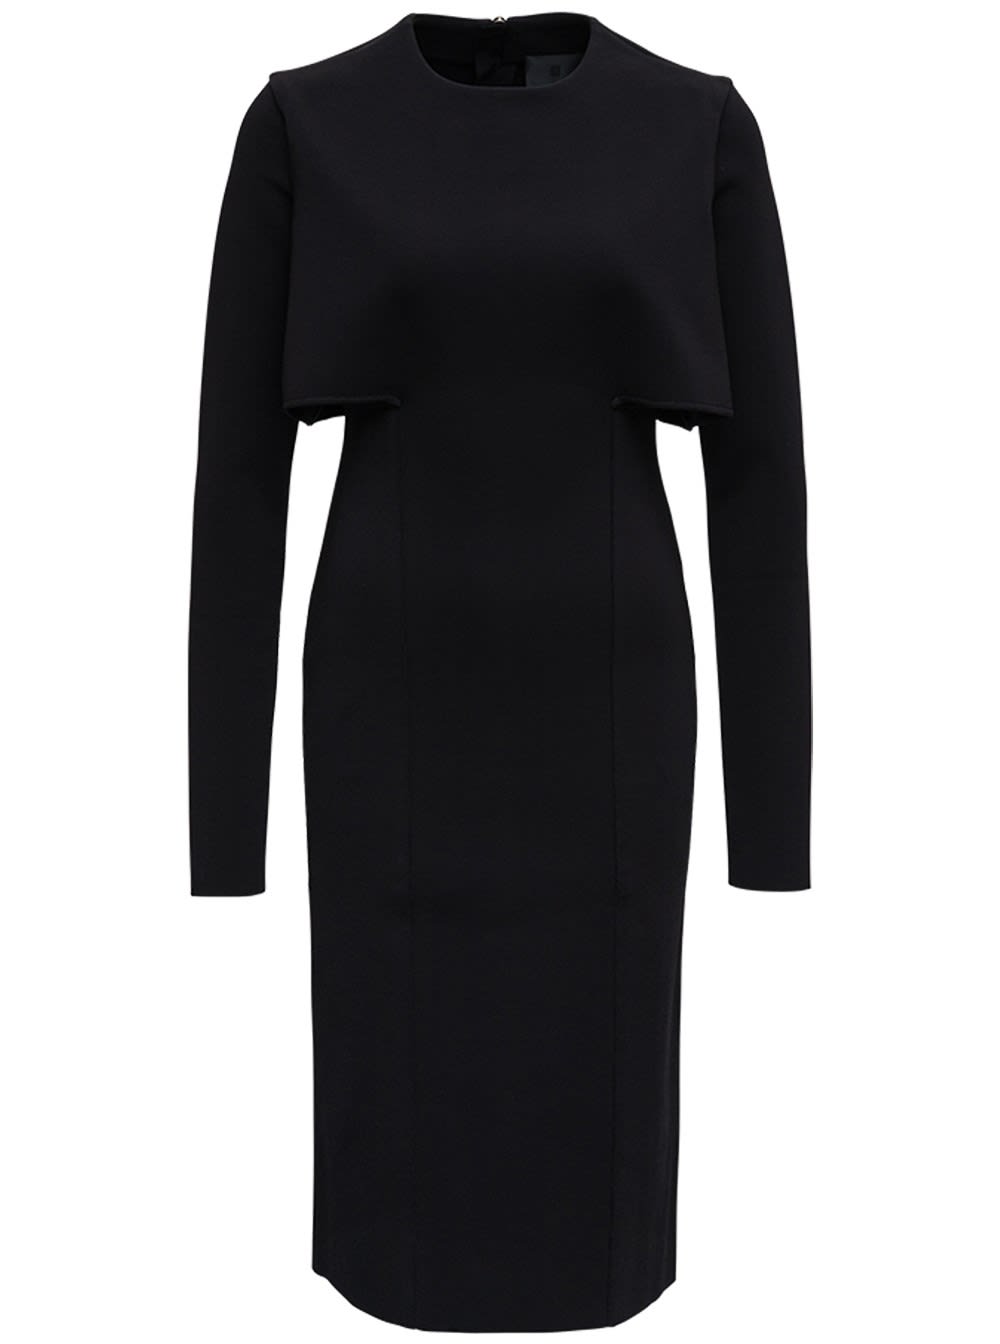 Photo of  Givenchy Black Dress With Cut-out Inserts- shop Givenchy Dresses, Black Dresses online sales